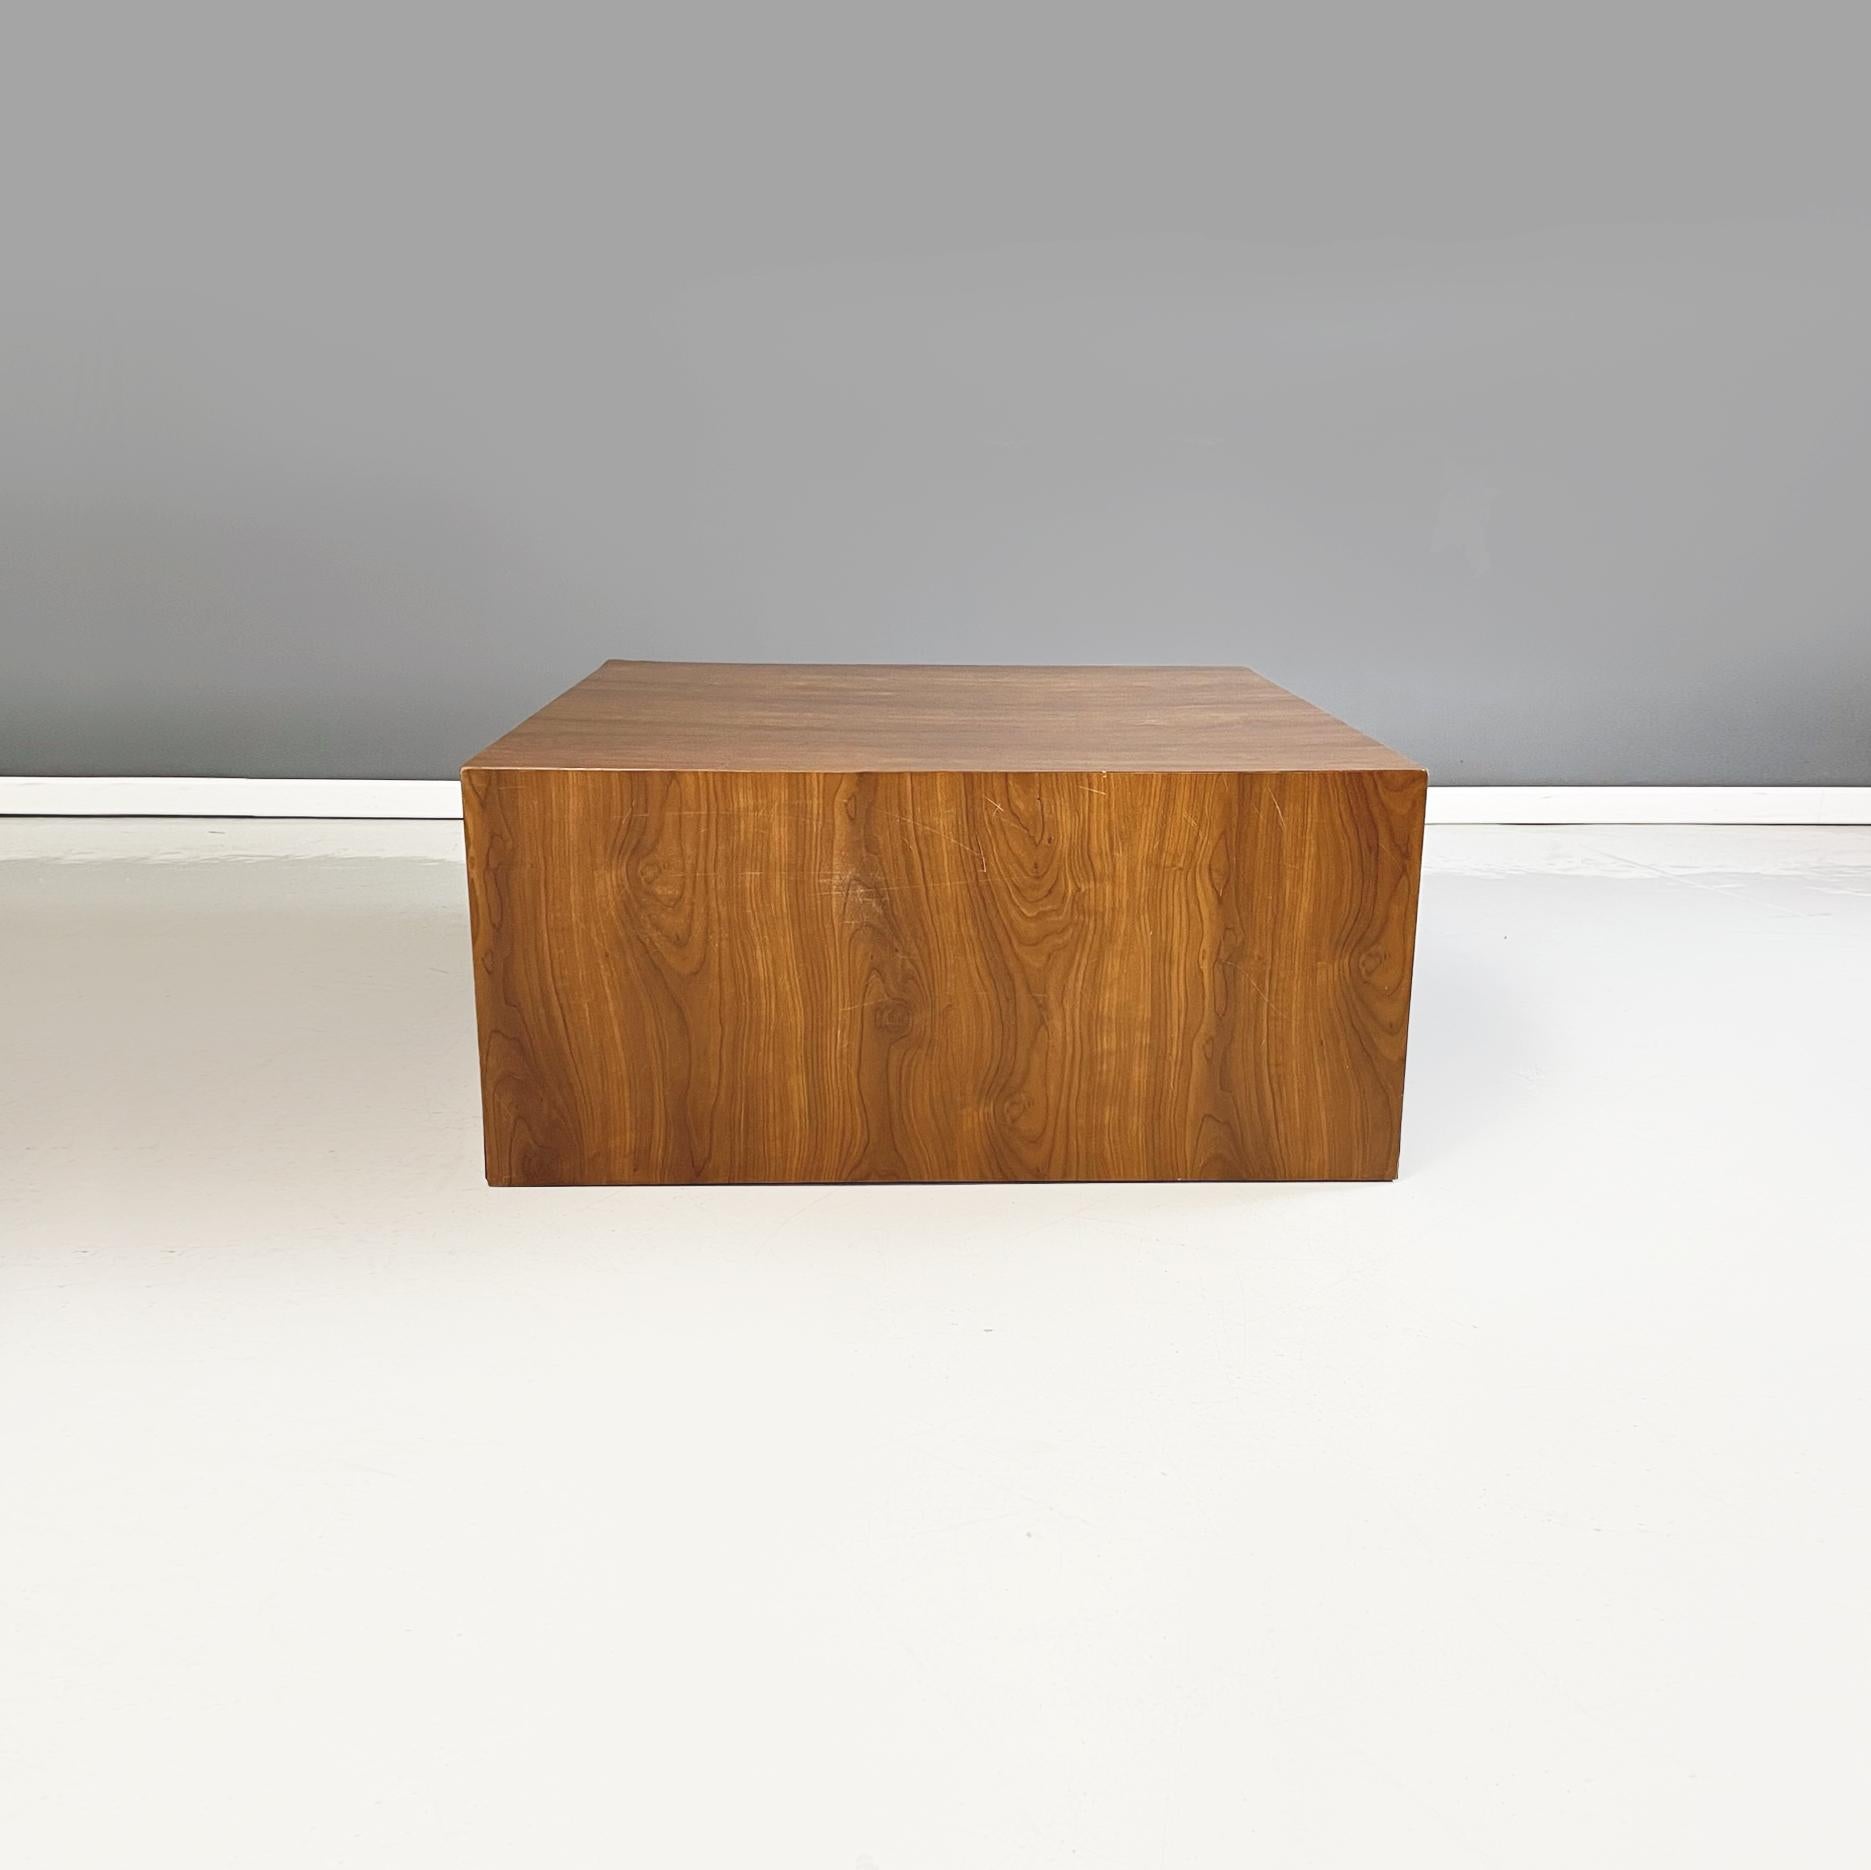 Italian modern Wooden square pedestal or stand display or coffe table, 1970s
Pedestal, display or coffee table, in the shape of a wooden parallelepiped. The entire structure is covered with its original walnut colored laminate.
1970s.
Vintage